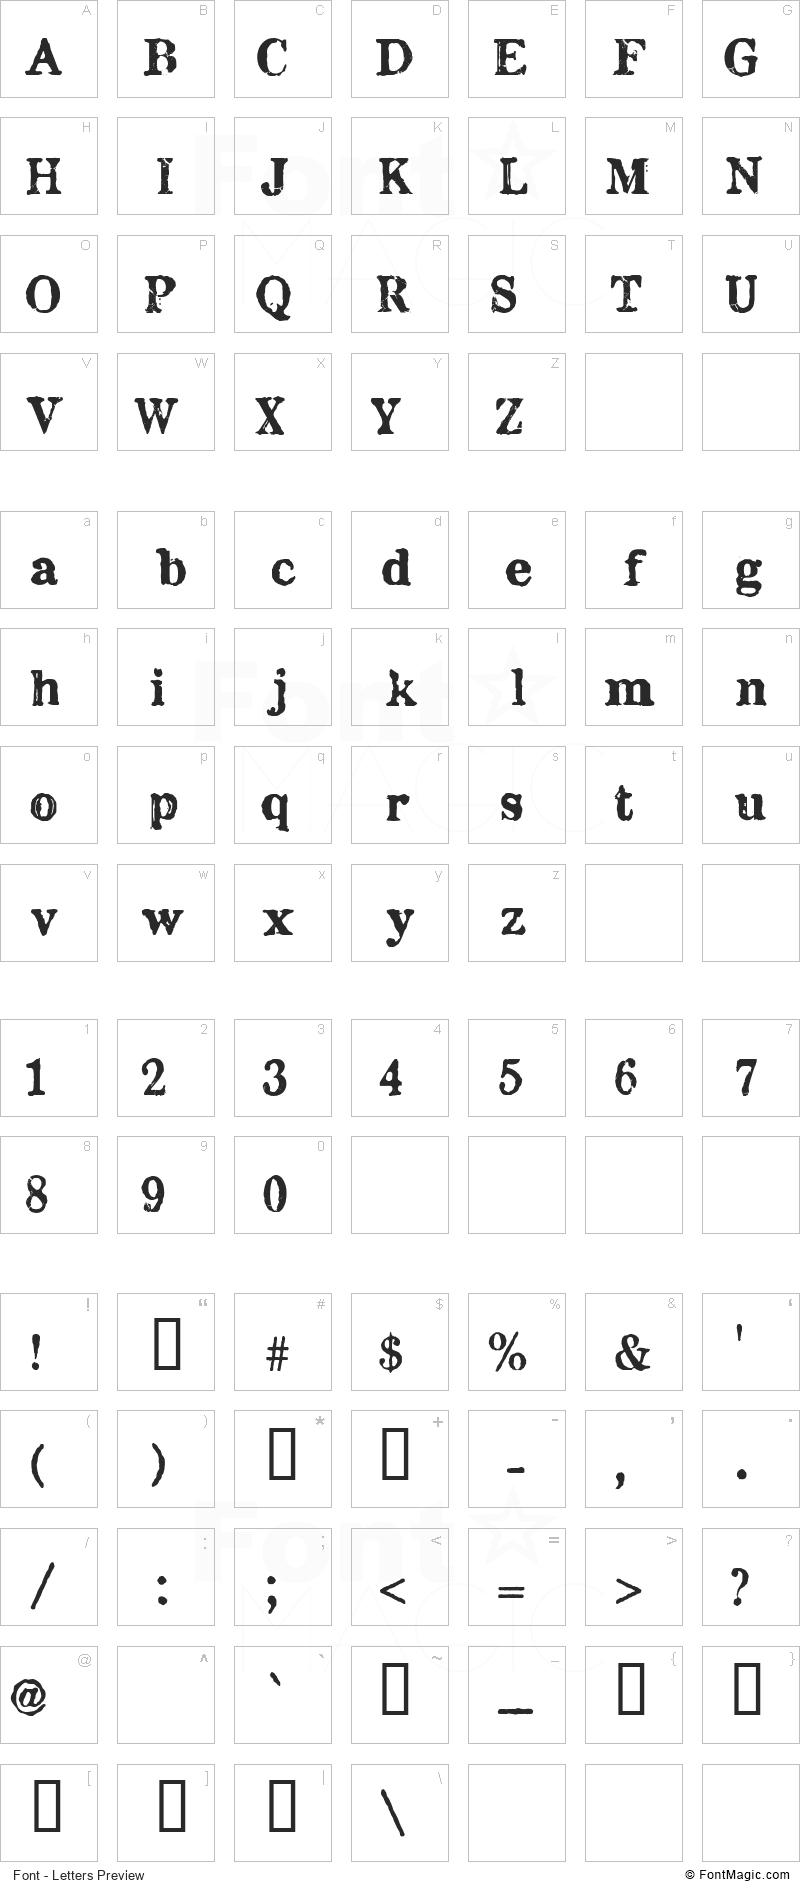 Chenier Font - All Latters Preview Chart